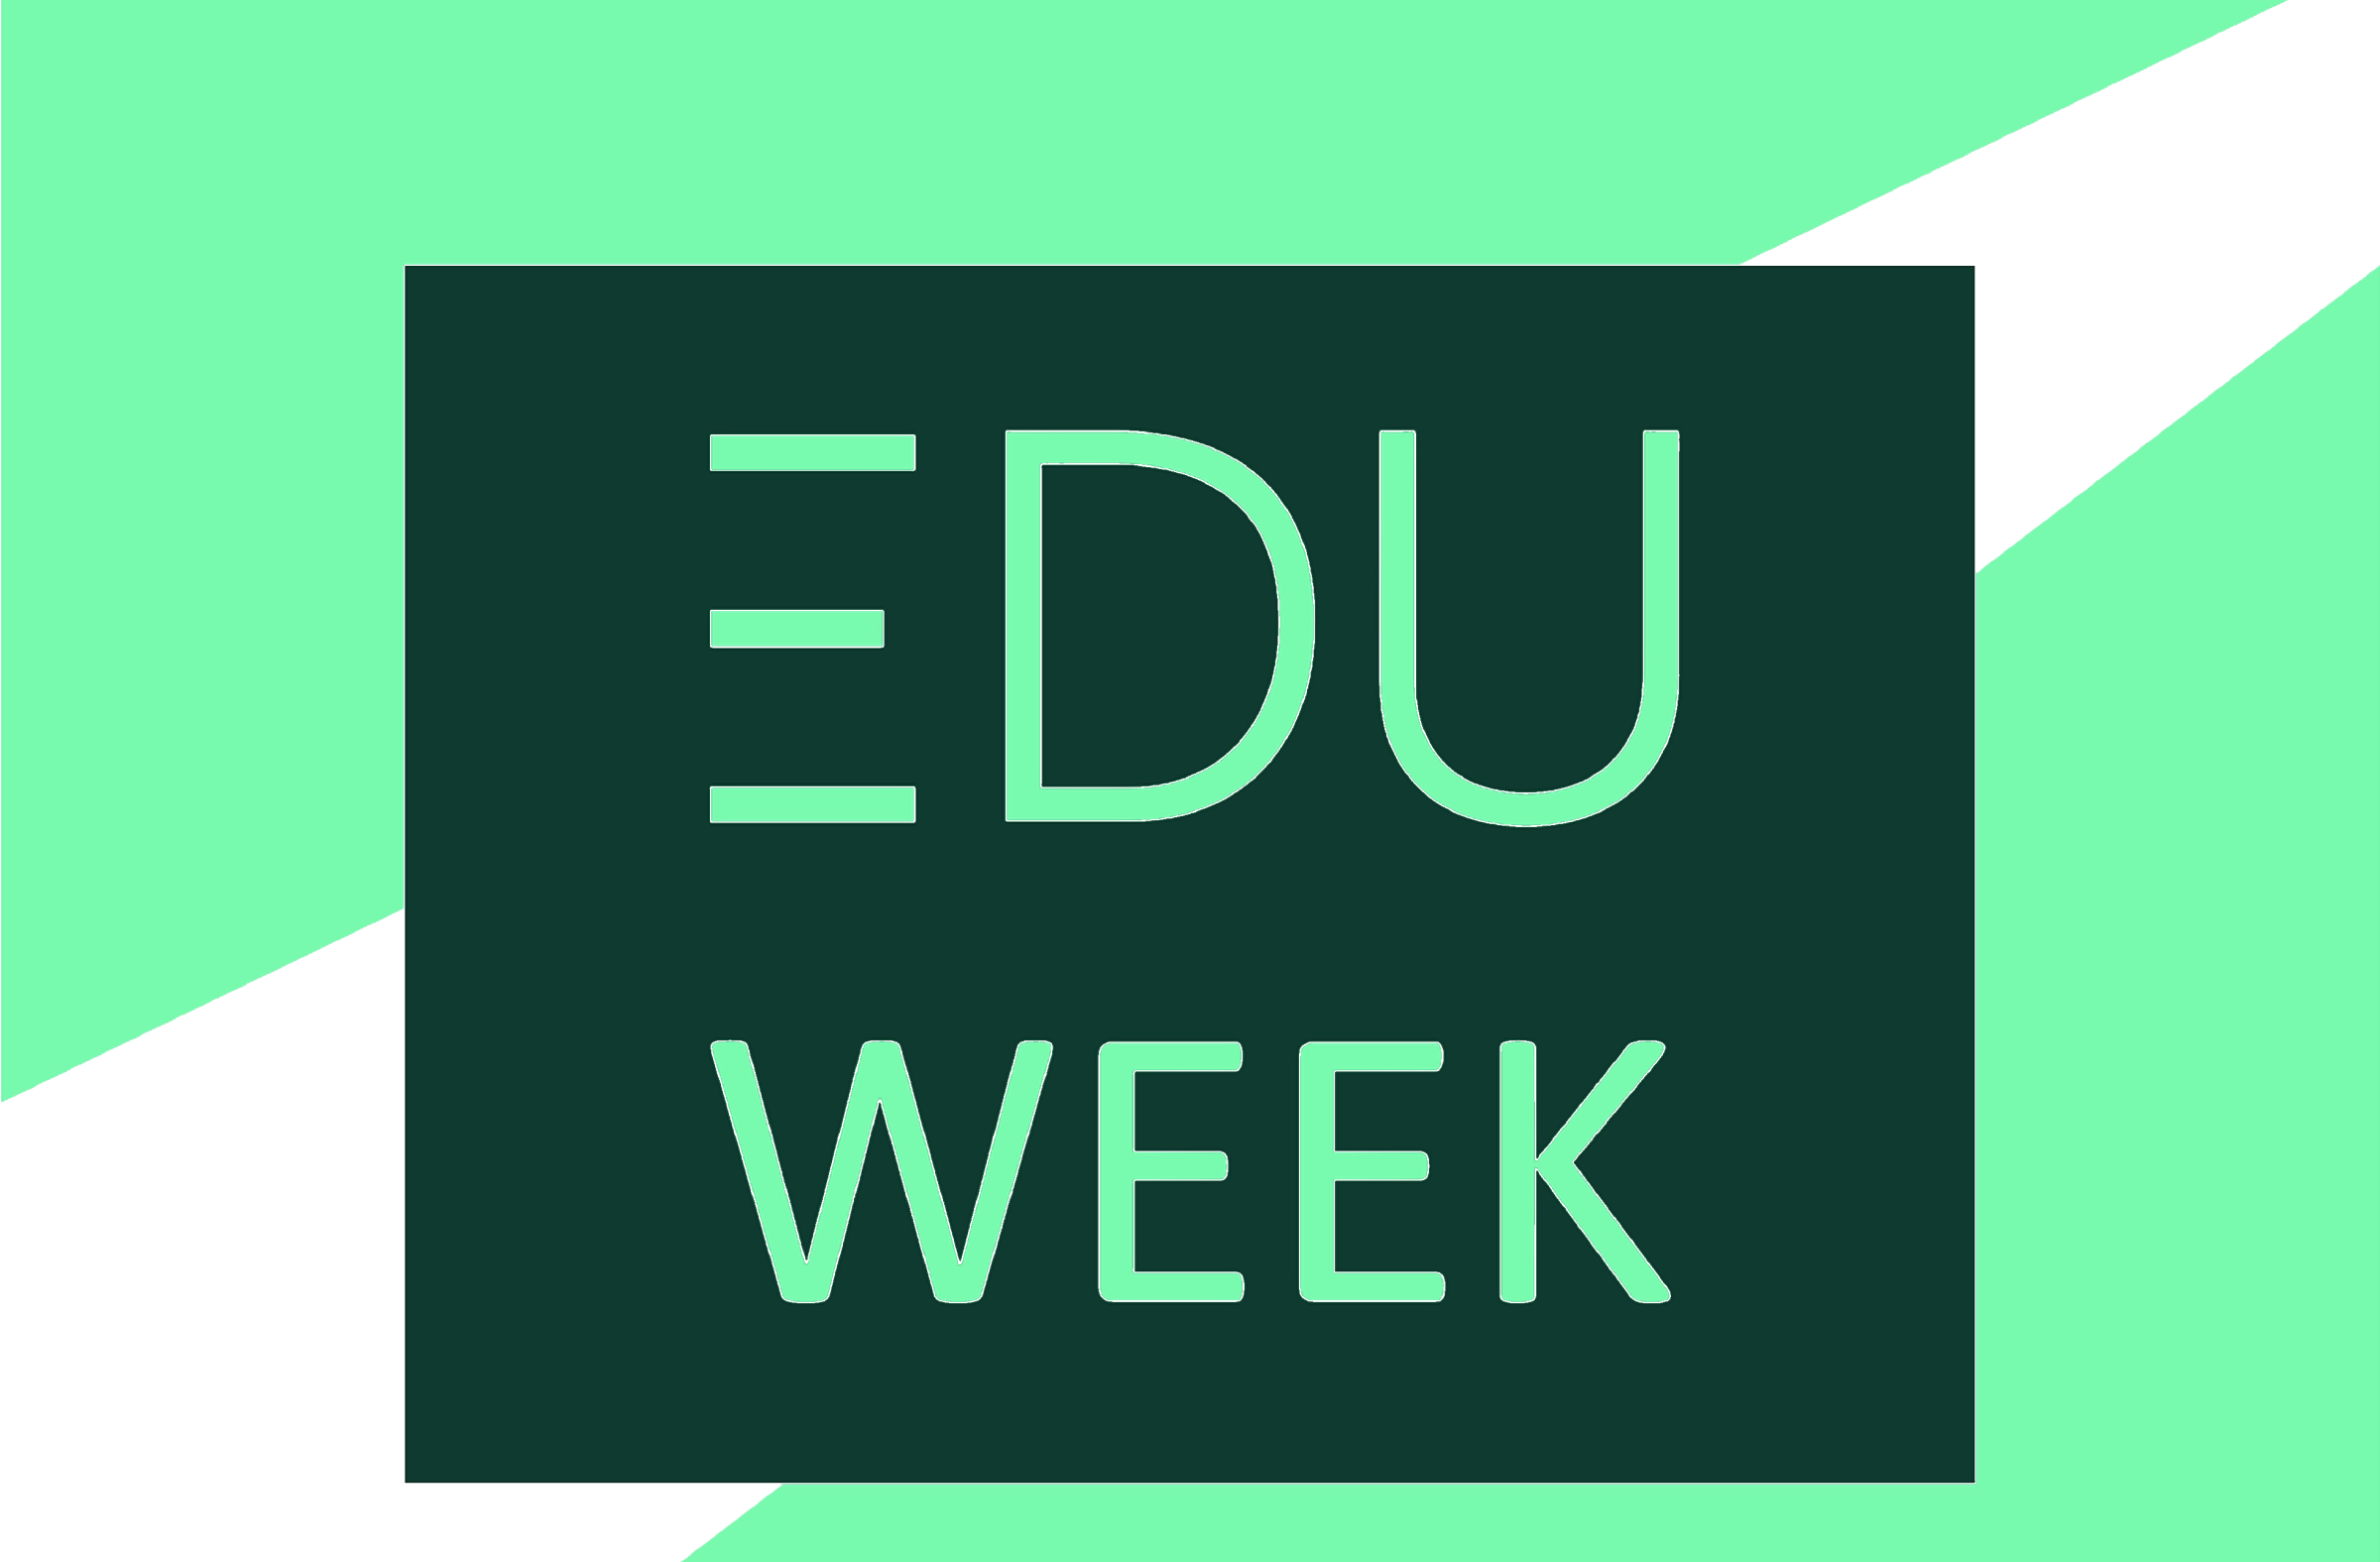 Fourth edition of the educational event EDU Week